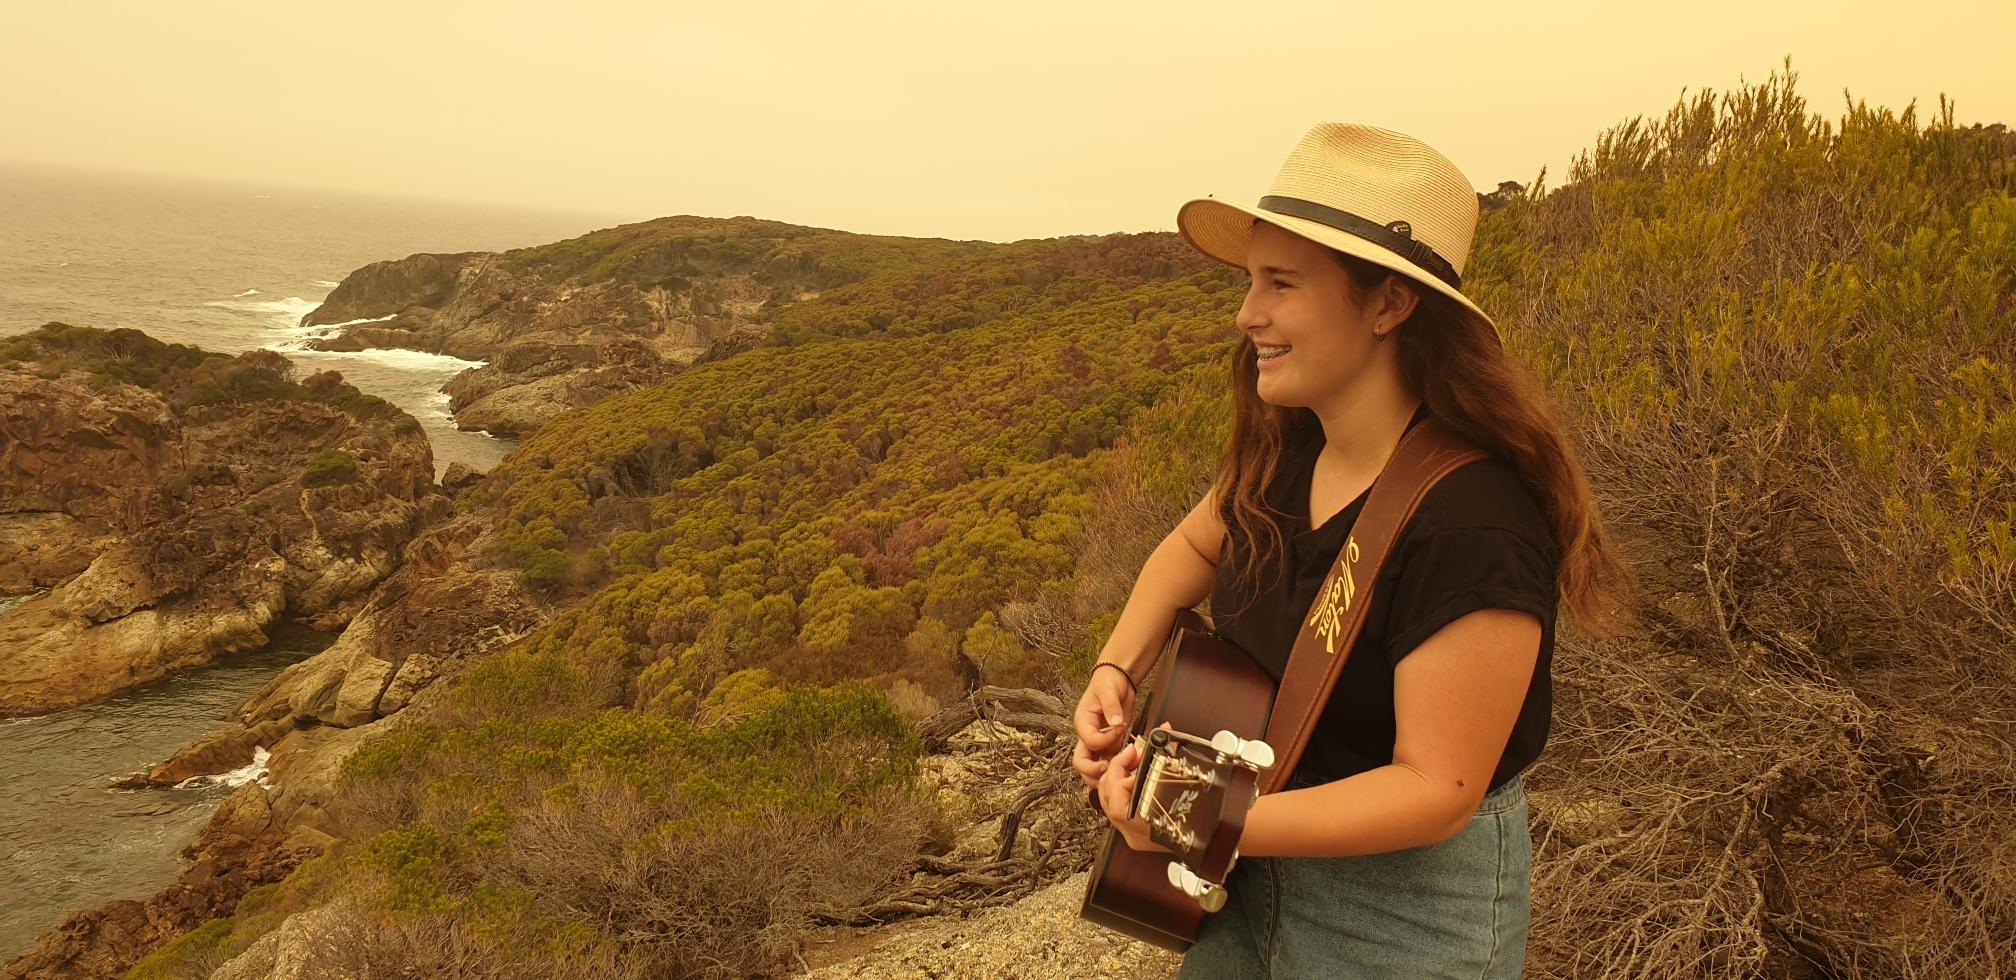 Bega's Felicity Dowd smashes the country music chart at 17